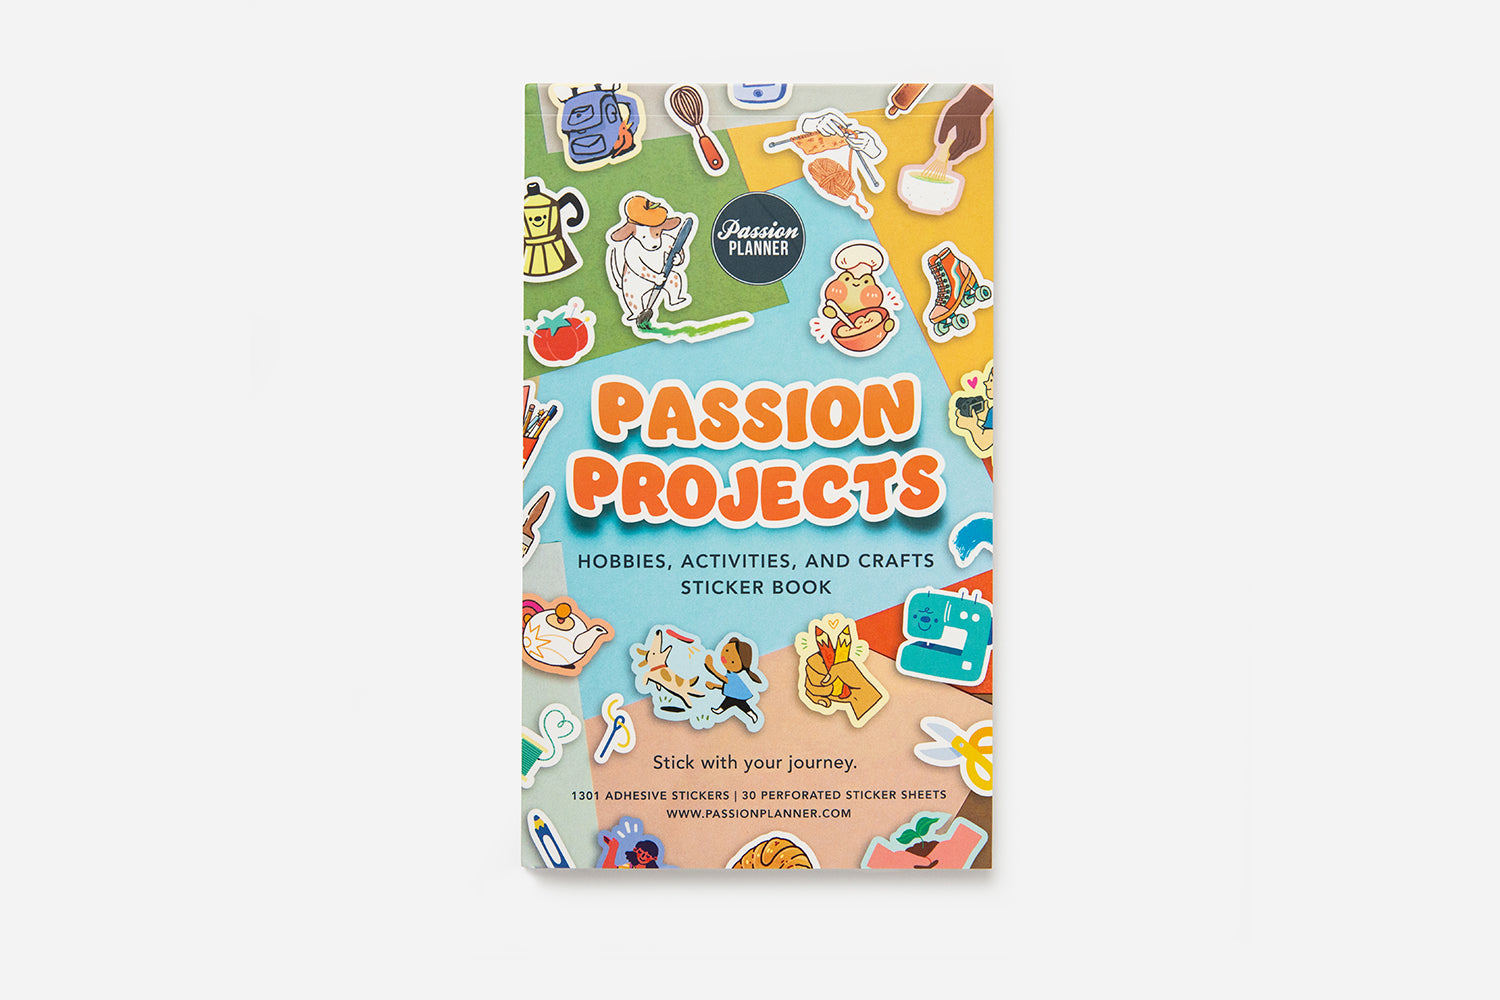 Passion Projects: Hobbies, Activities, and Crafts Sticker Book